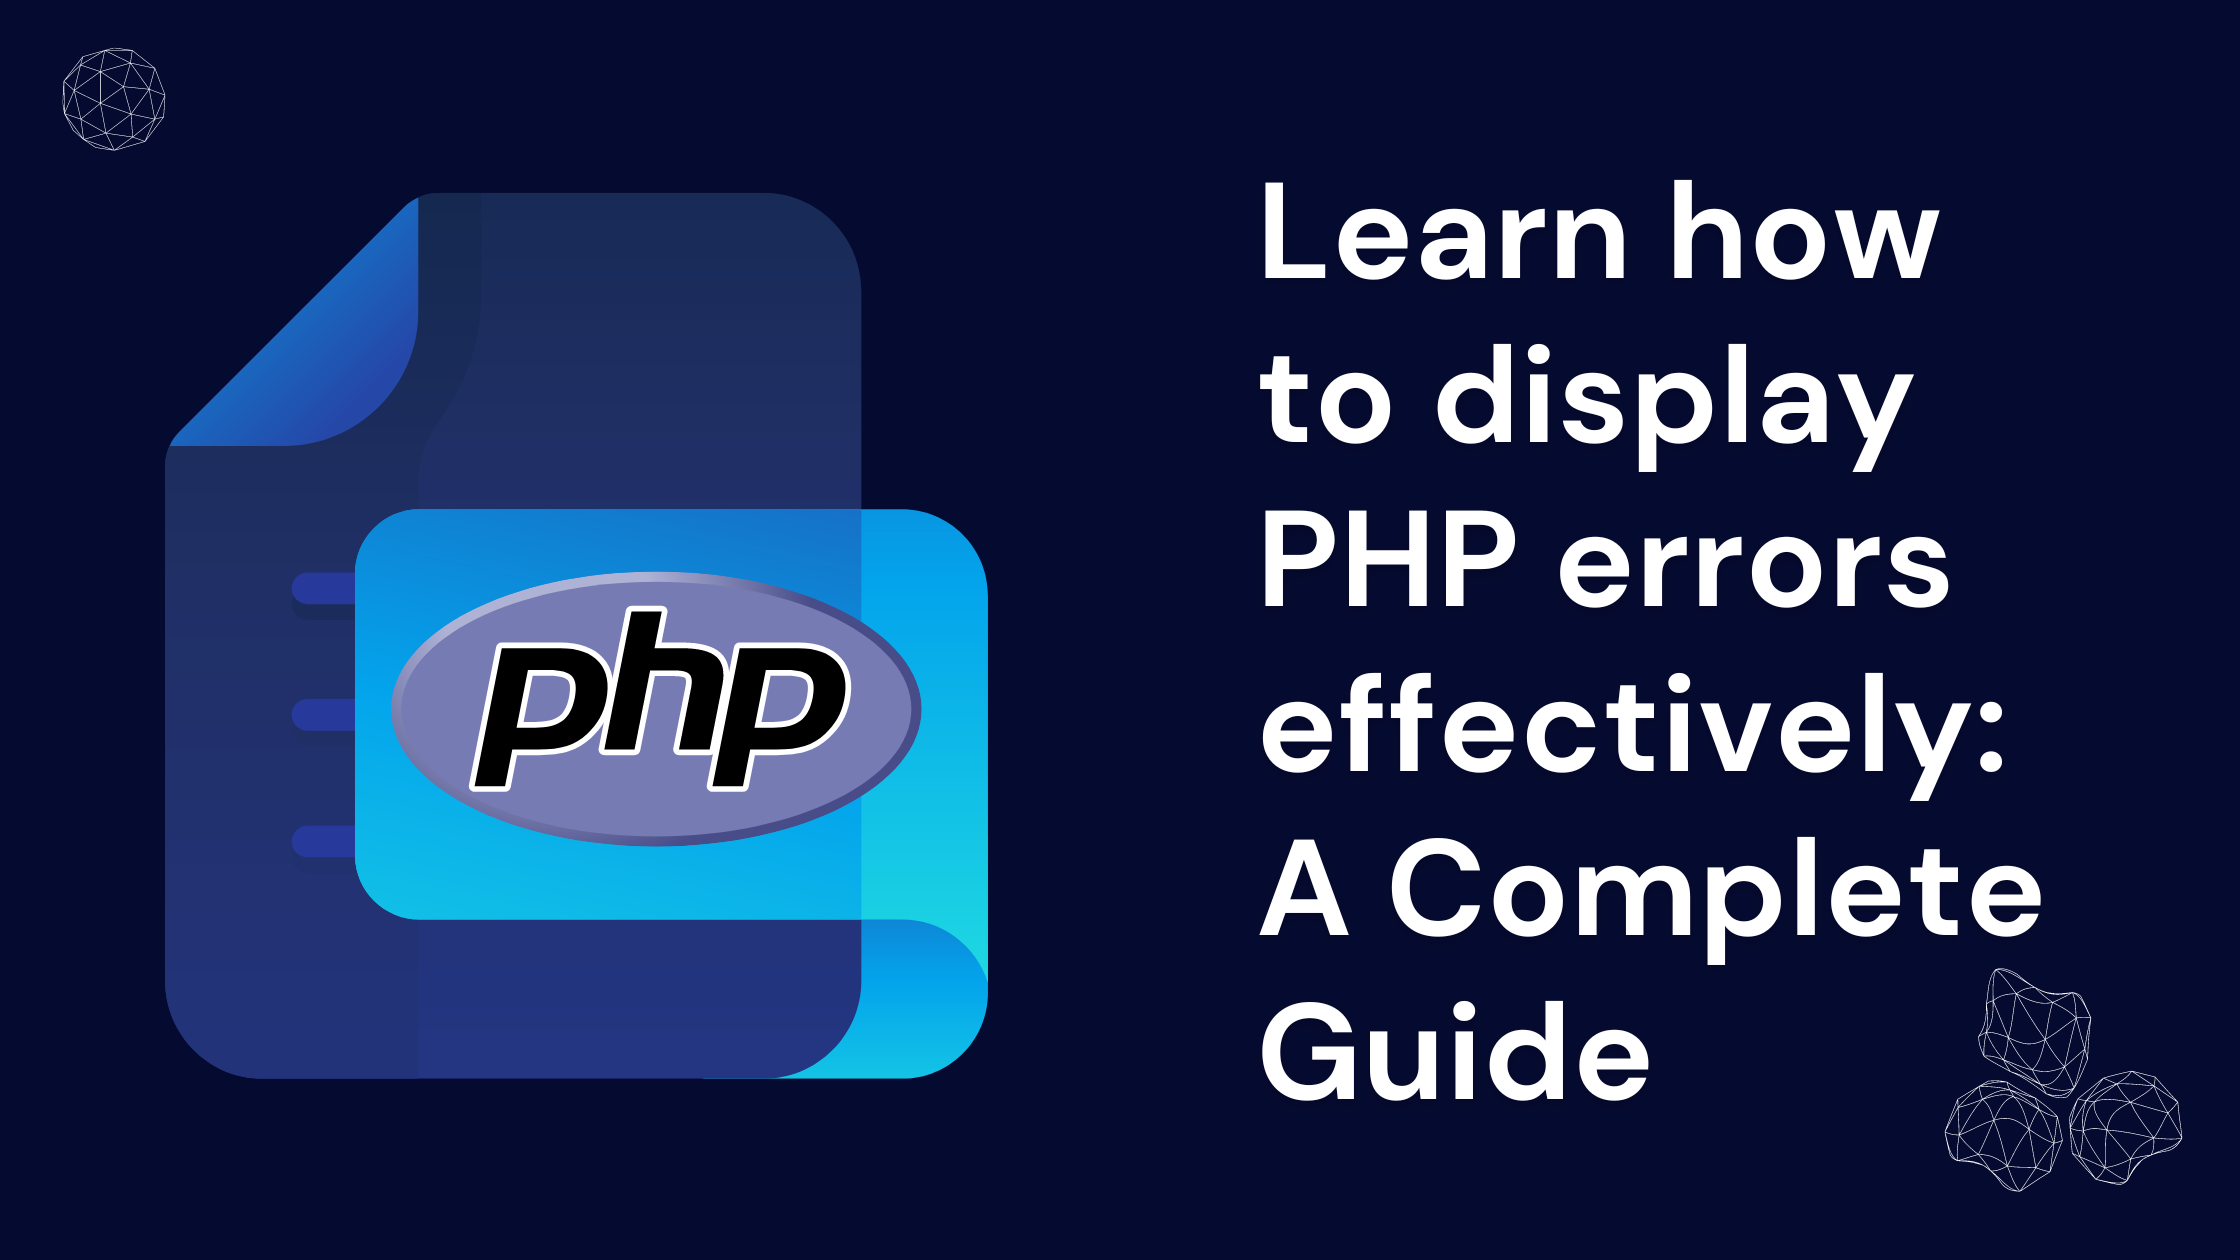 How do I get PHP errors to display